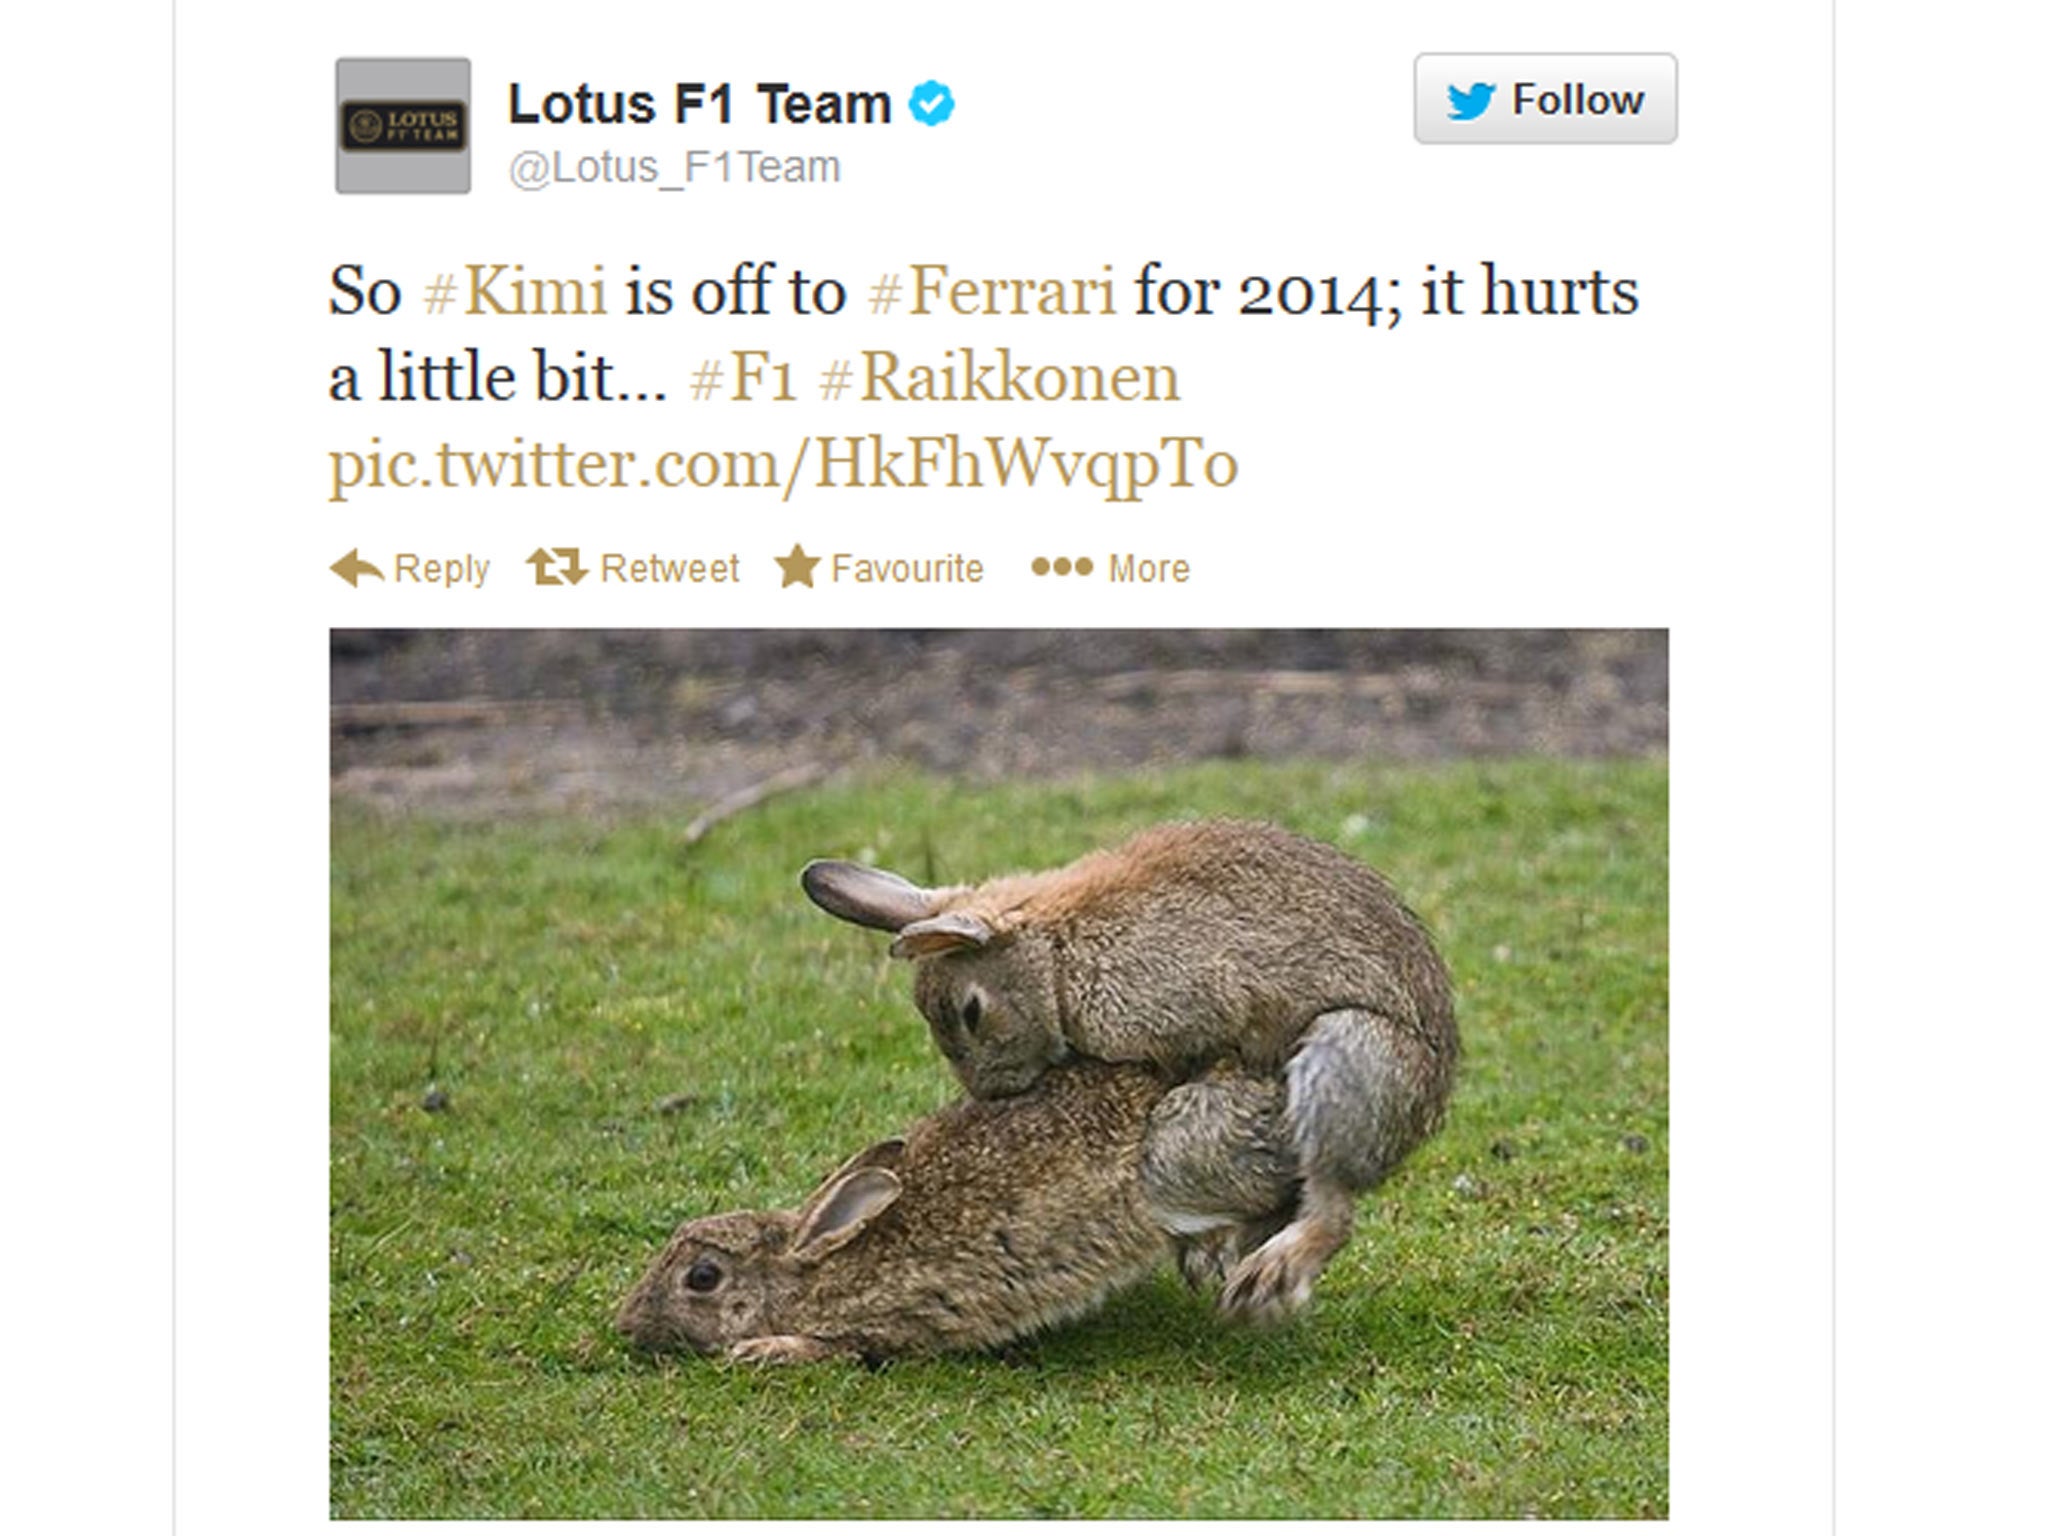 The tweet issued from the official Lotus account